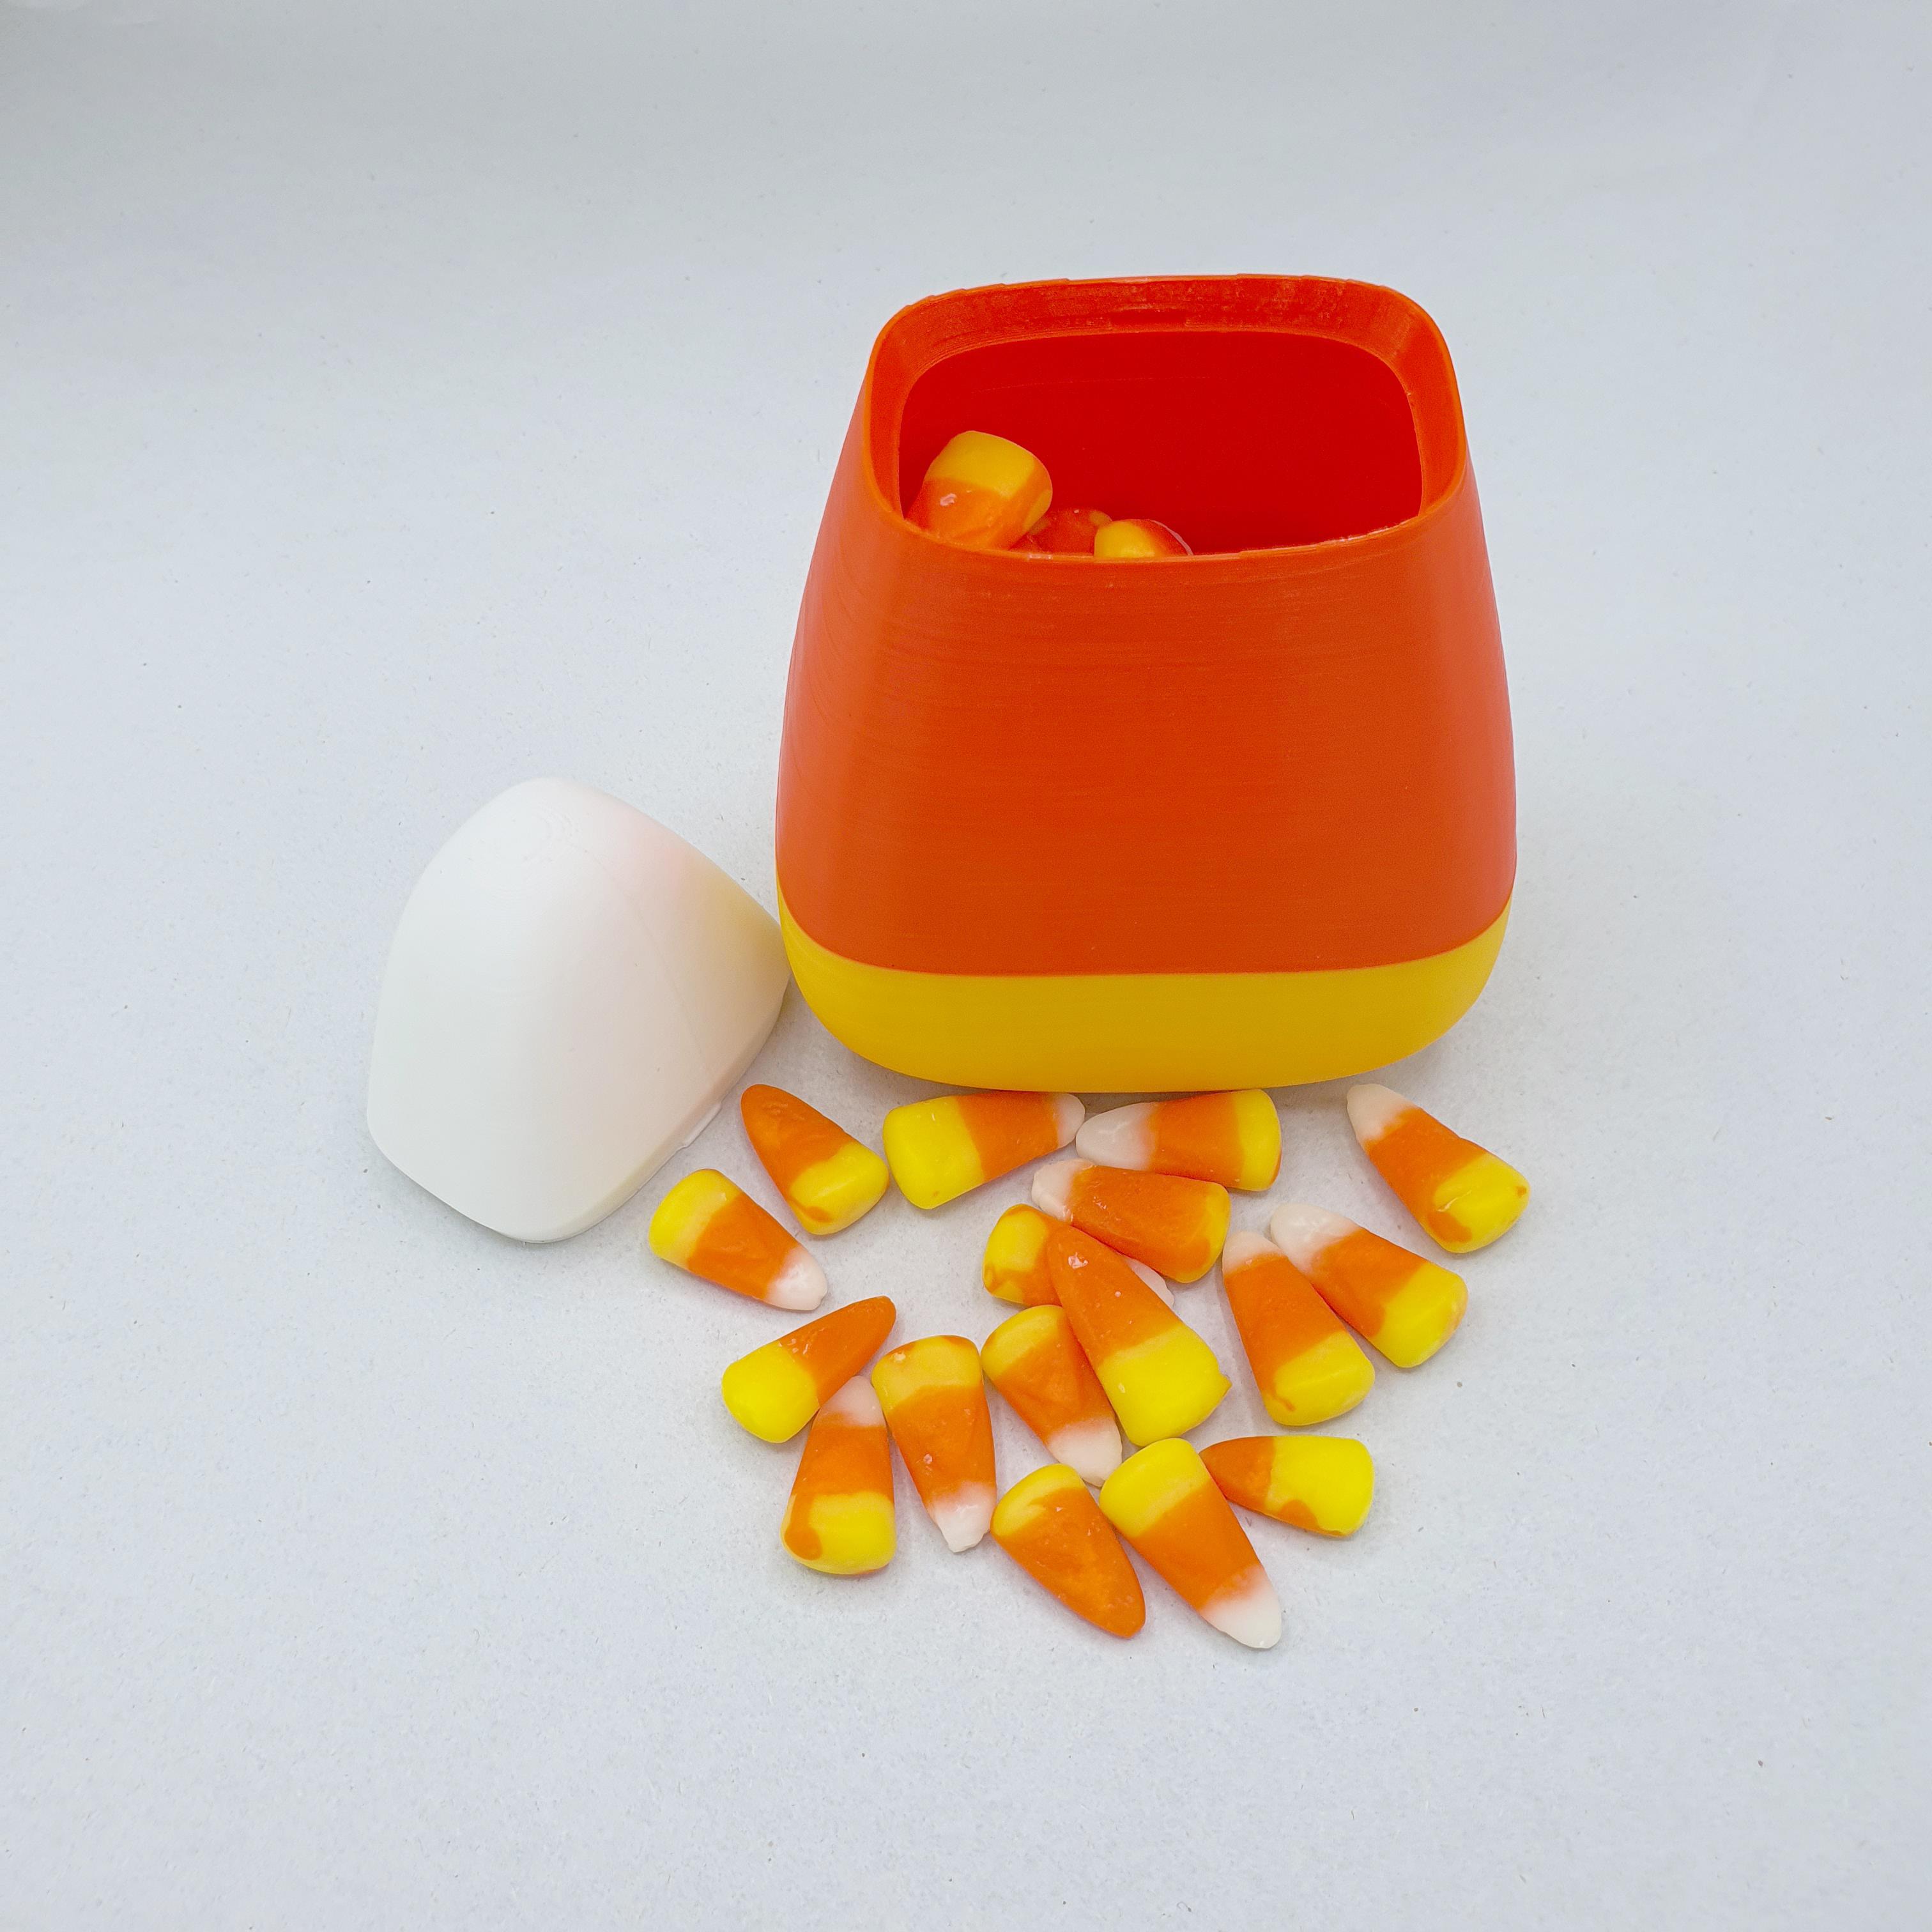 CANDY CORN CONTAINER PRINT IN PLACE NO SUPPORTS CANDY CORN STASH 3d model